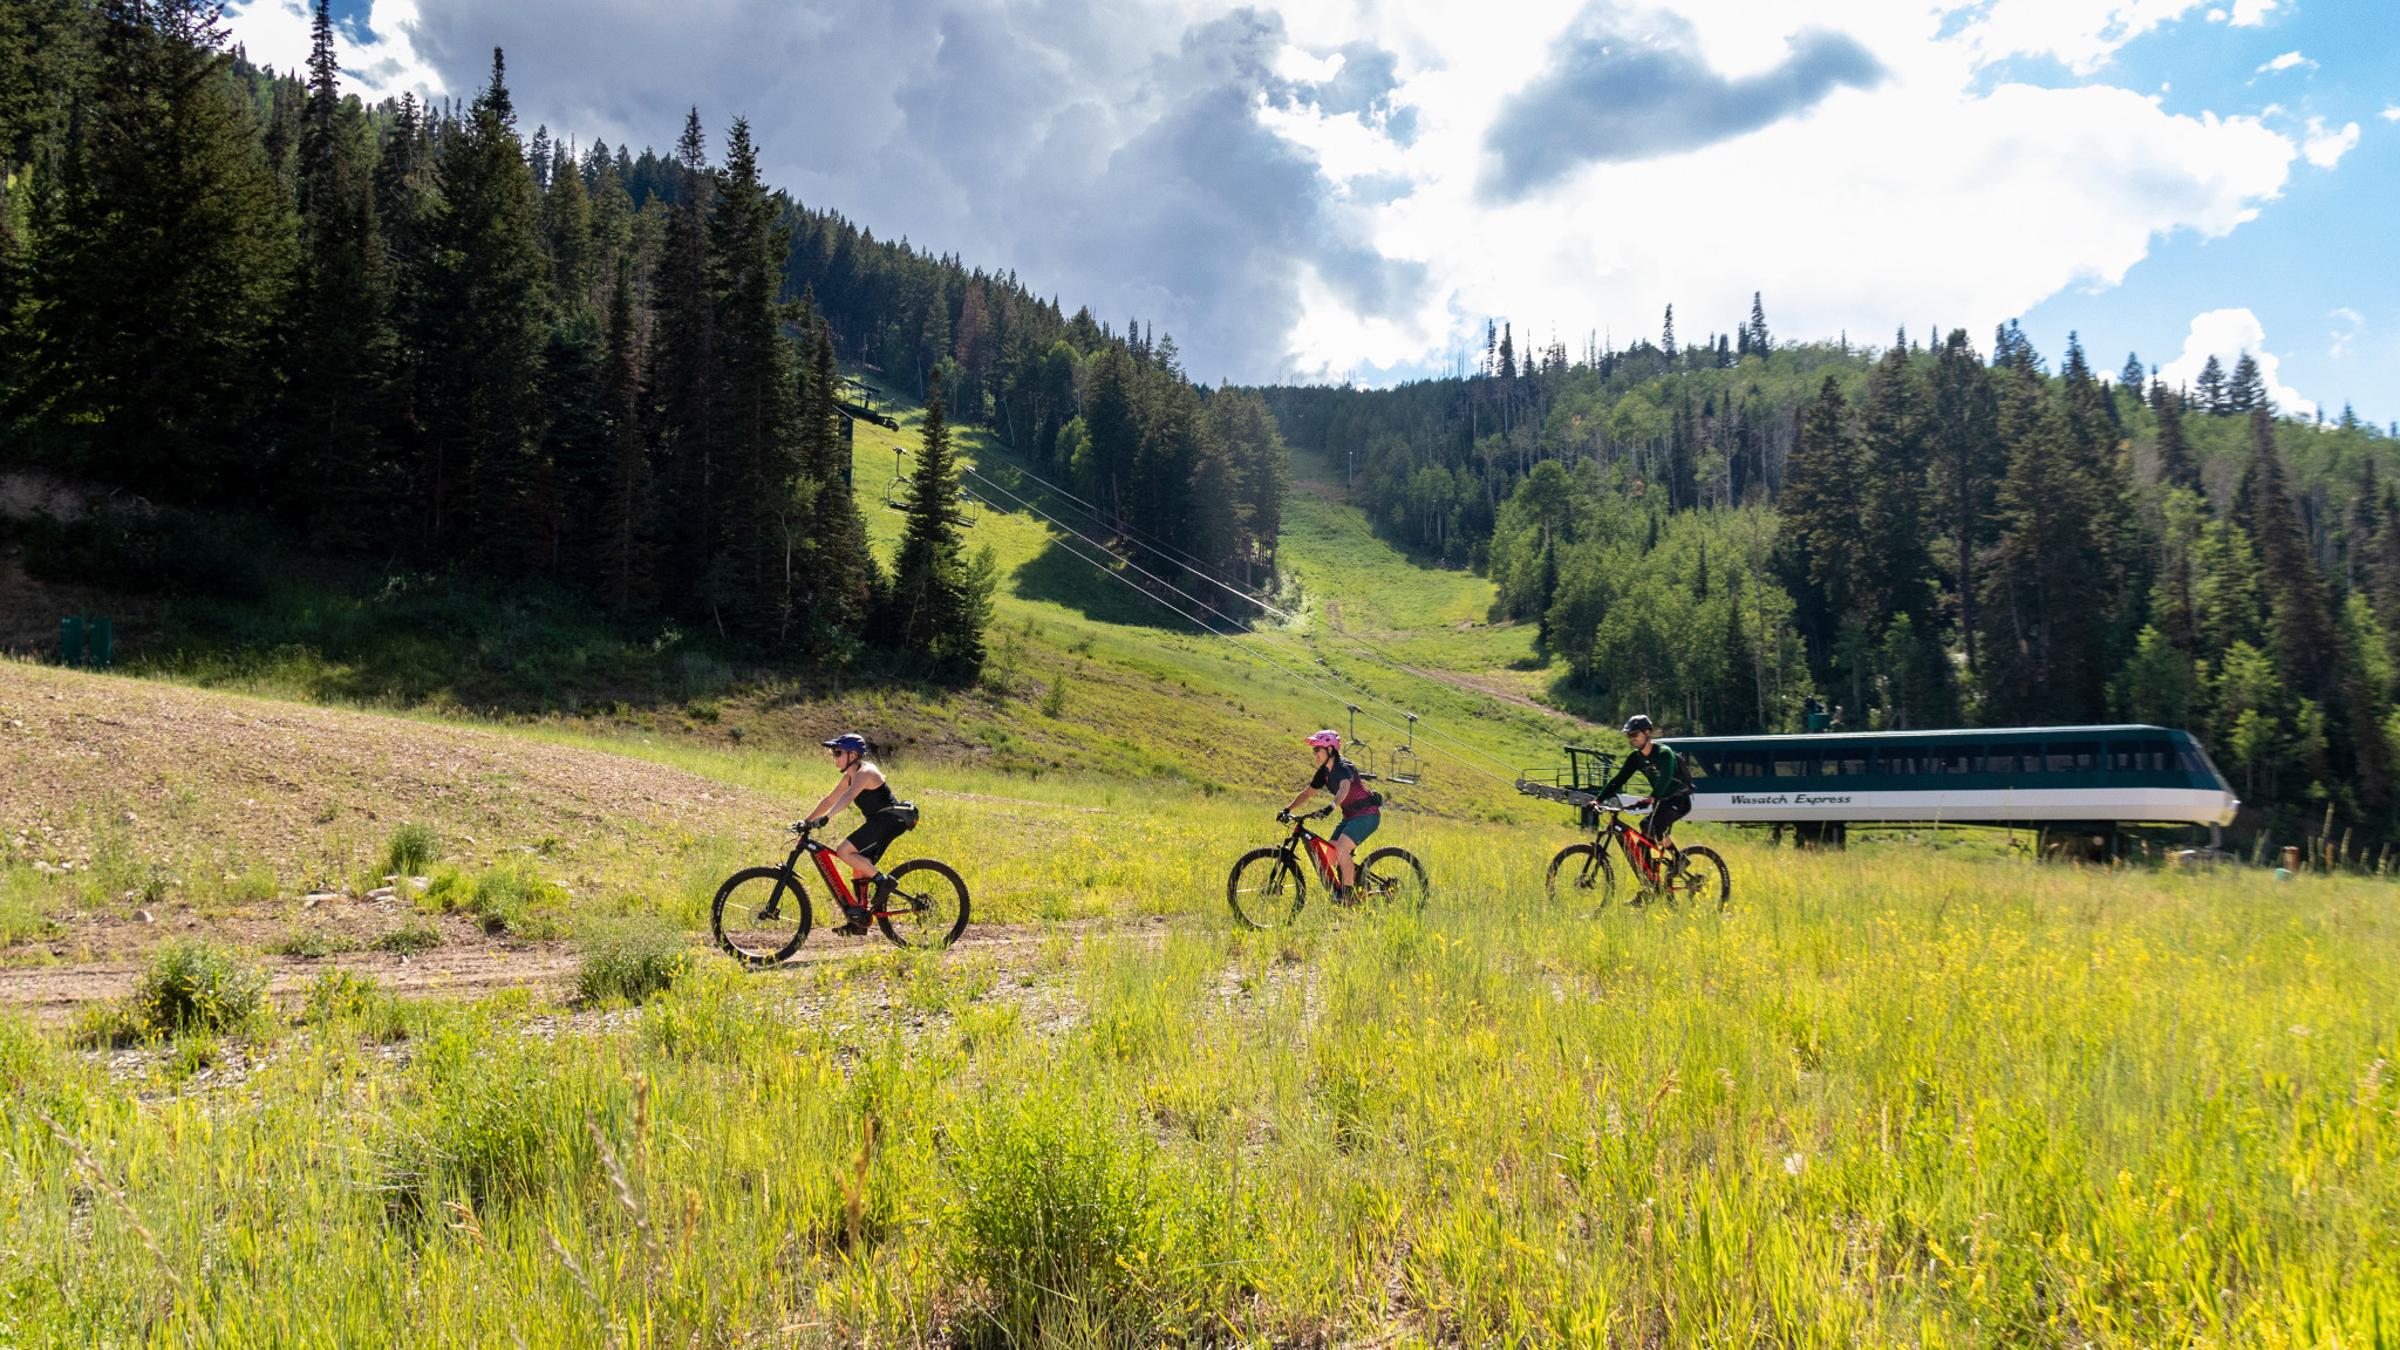 Two guests on an ebike tour at Deer Valley Resort with a Deer Valley bike guide